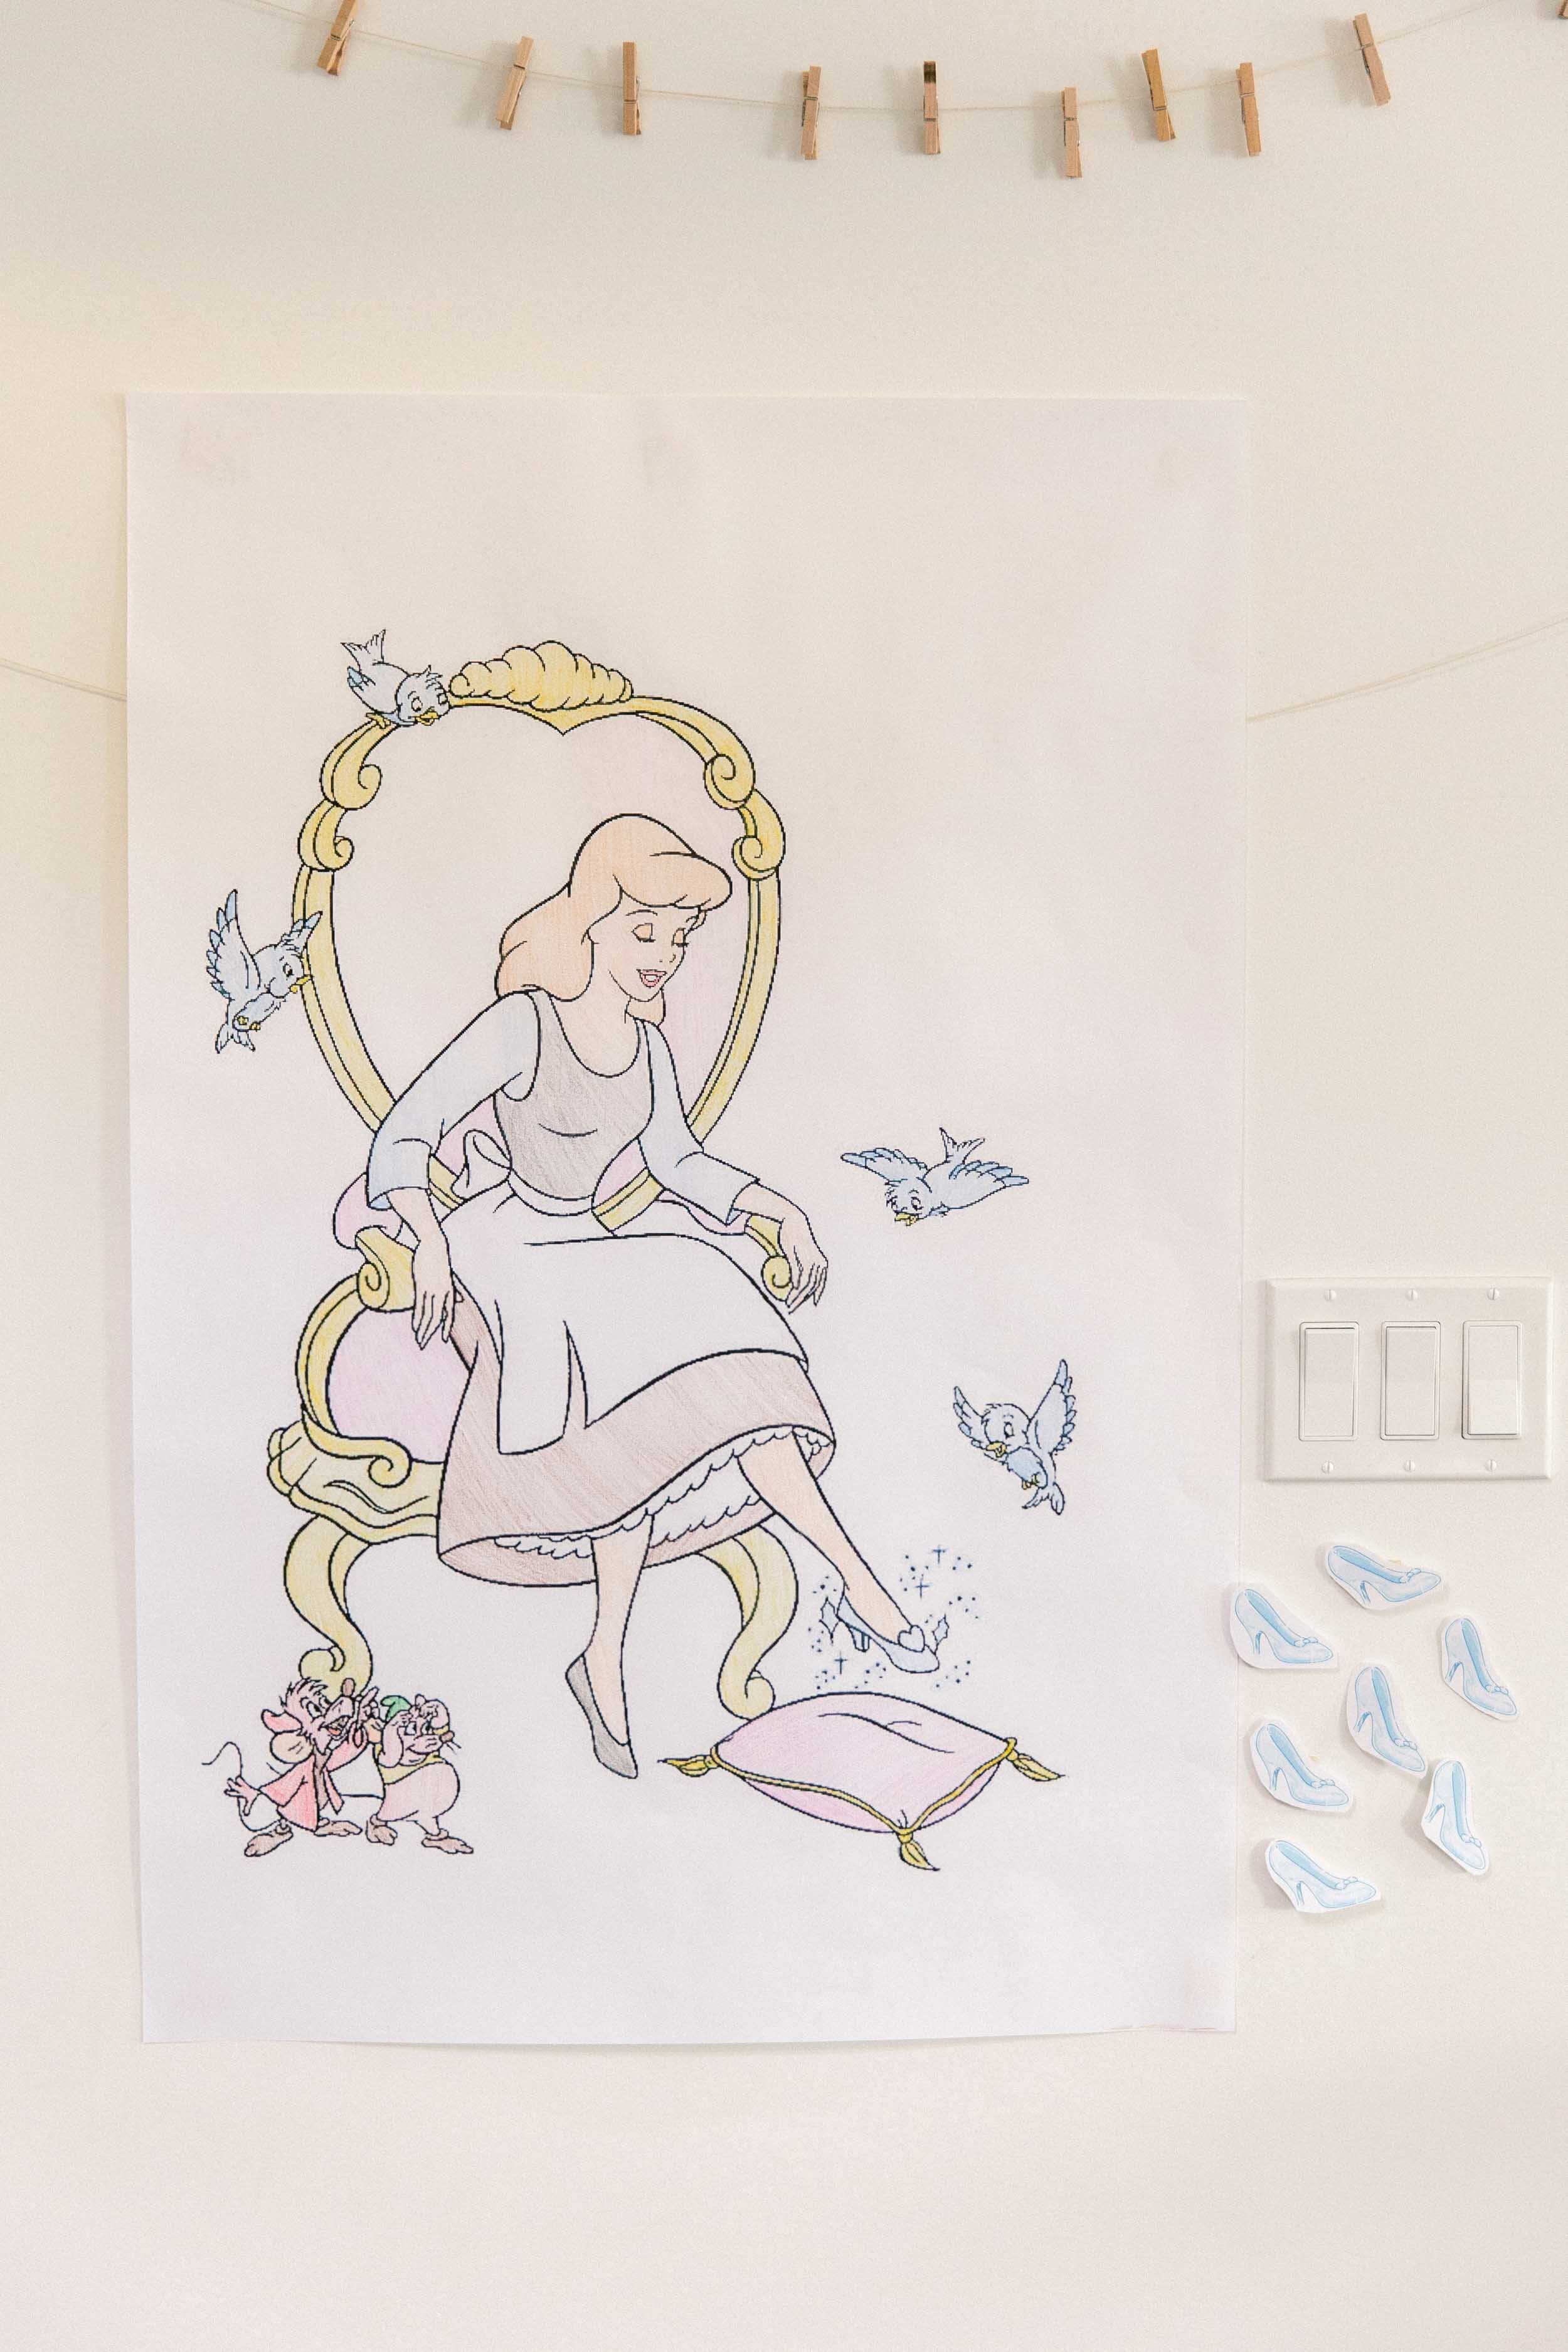 CINDERELLA INSPIRED COVID BIRTHDAY DECORATION IDEAS PARTY GAMES PIN THE SLIPPER ON CINDERELLA